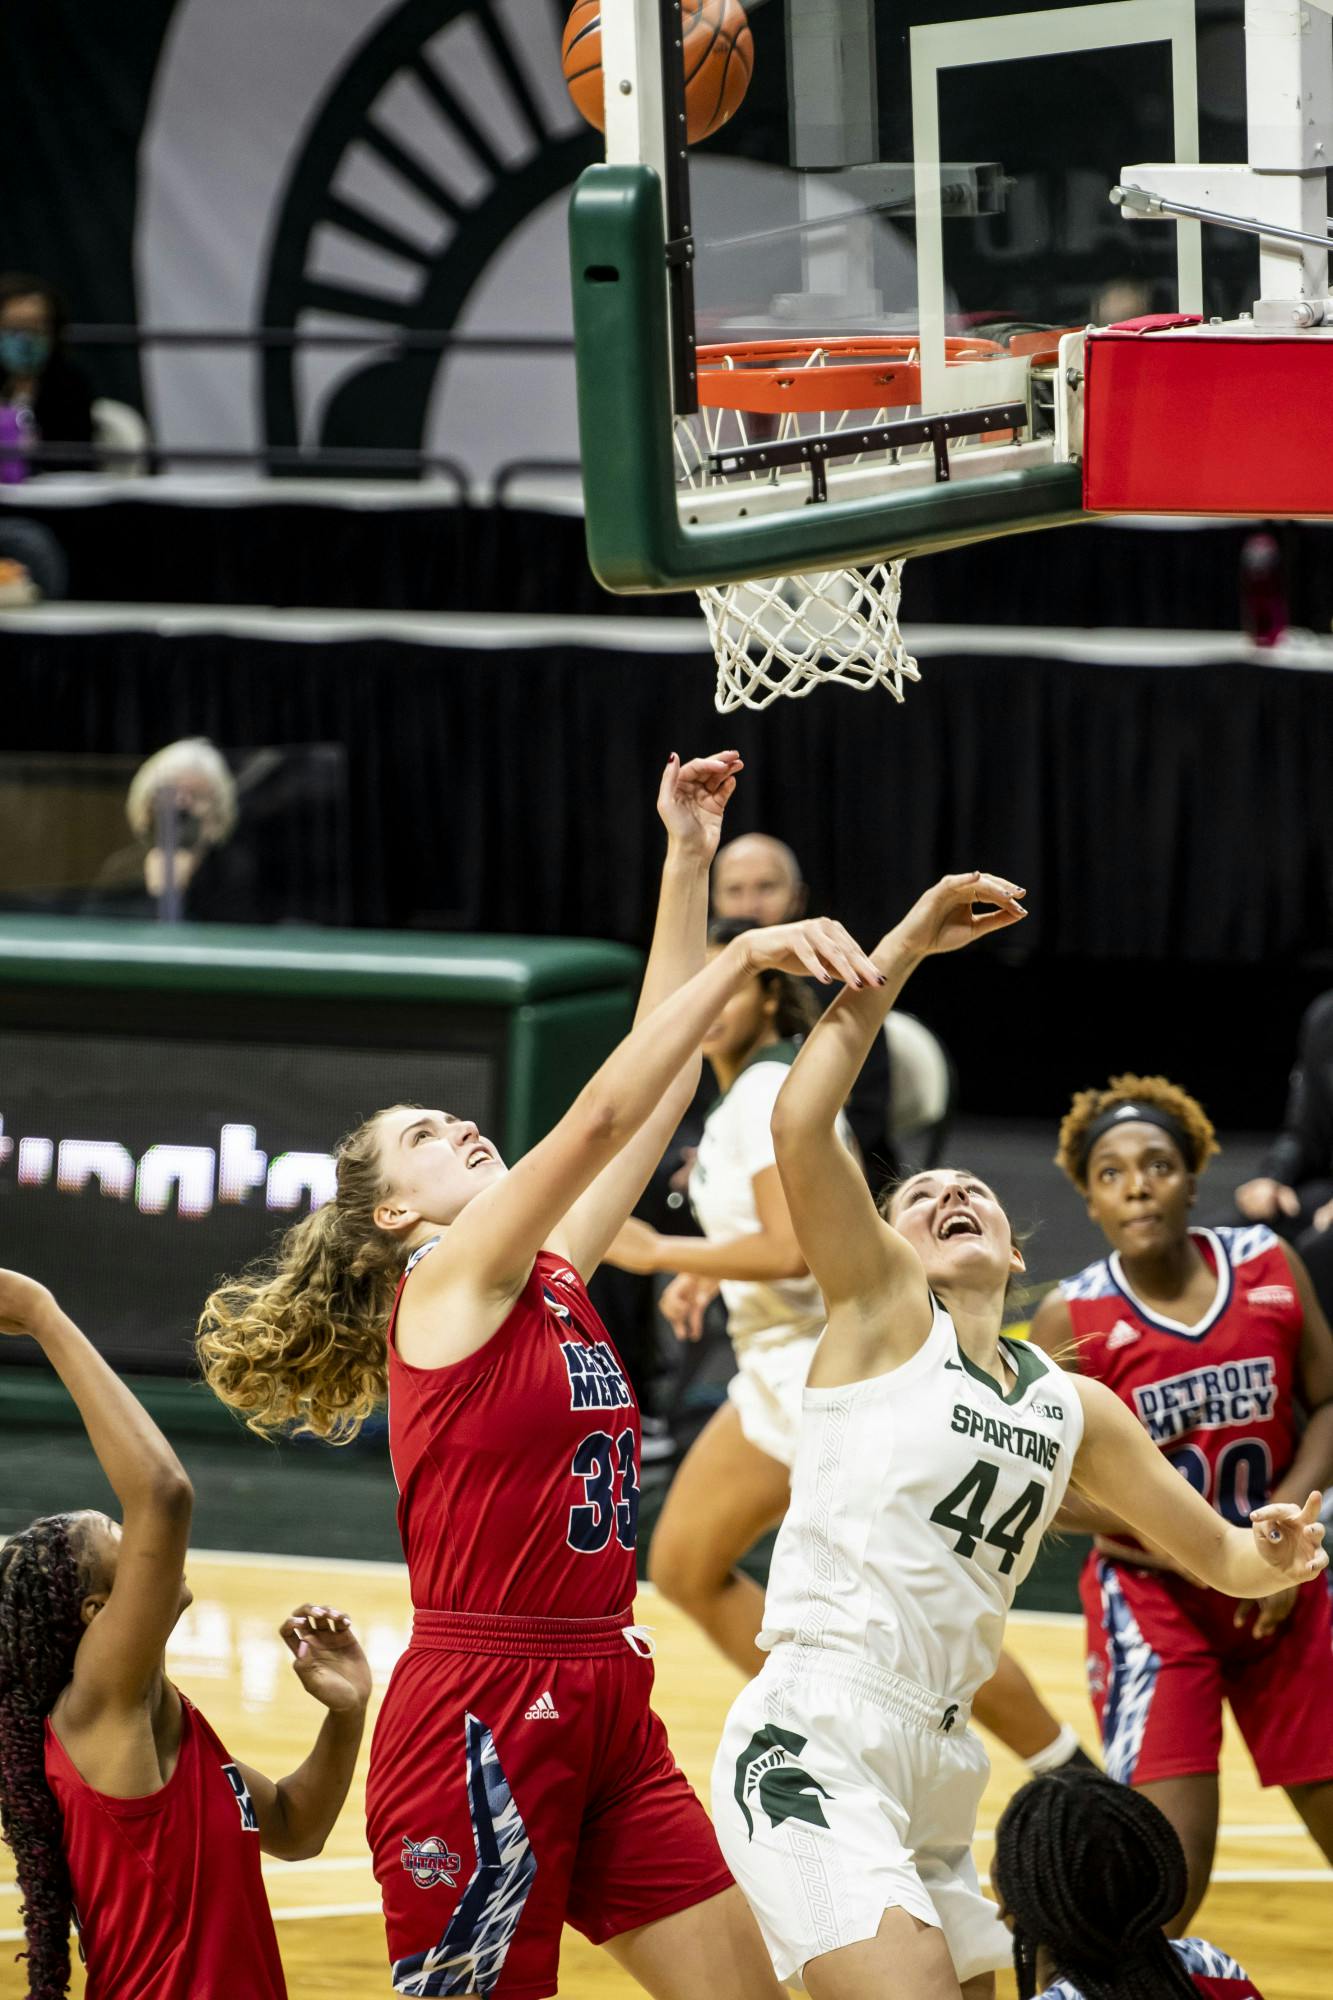 <p>MSU women&#x27;s basketball goes up against Detroit Mercy in their second game of the season Dec. 2, 2020.</p>